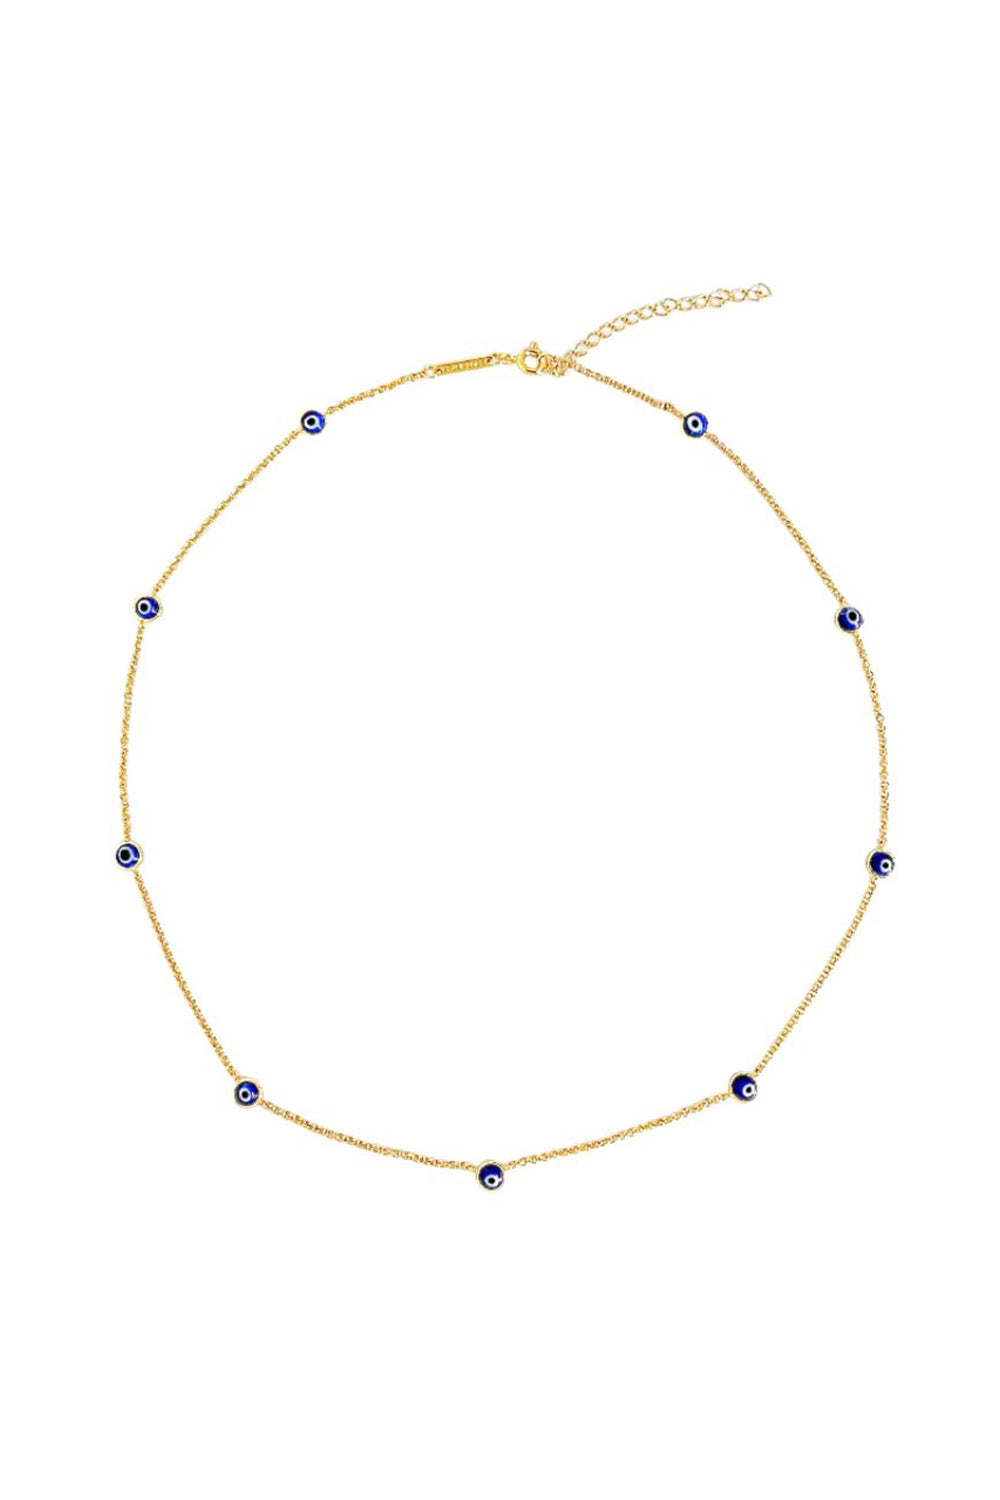 GOLD SISTER - GOOD INTENTION NECKLACE  GOLD & BLUE